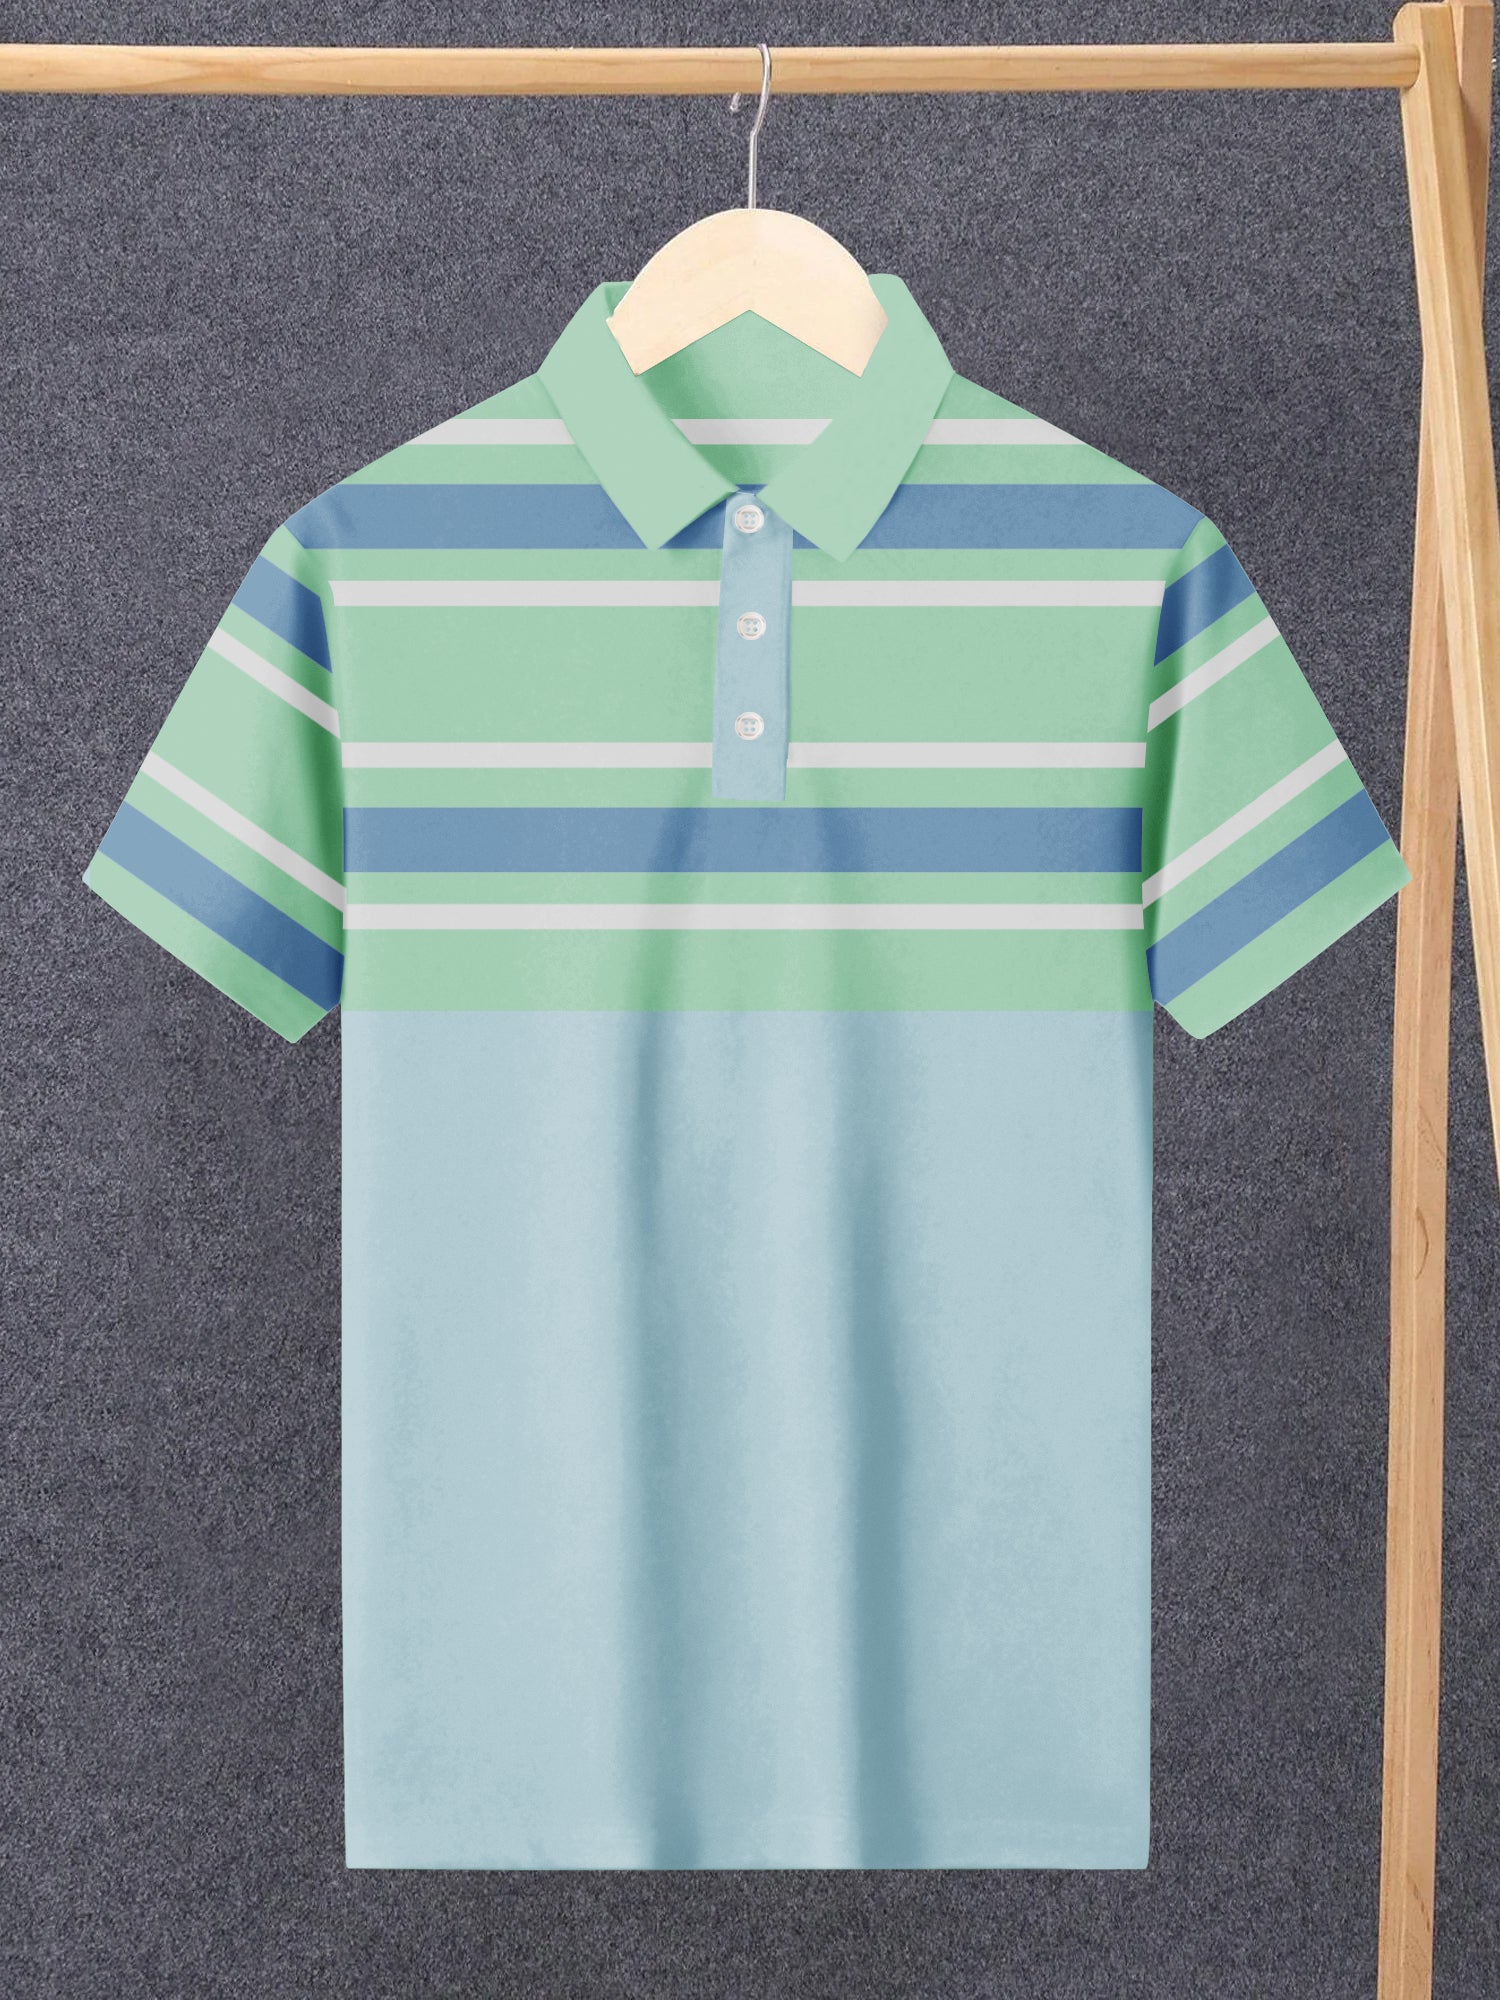 NXT Summer Polo Shirt For Men-Sky Blue & Light Green with Blue & White Stripes-SP1510